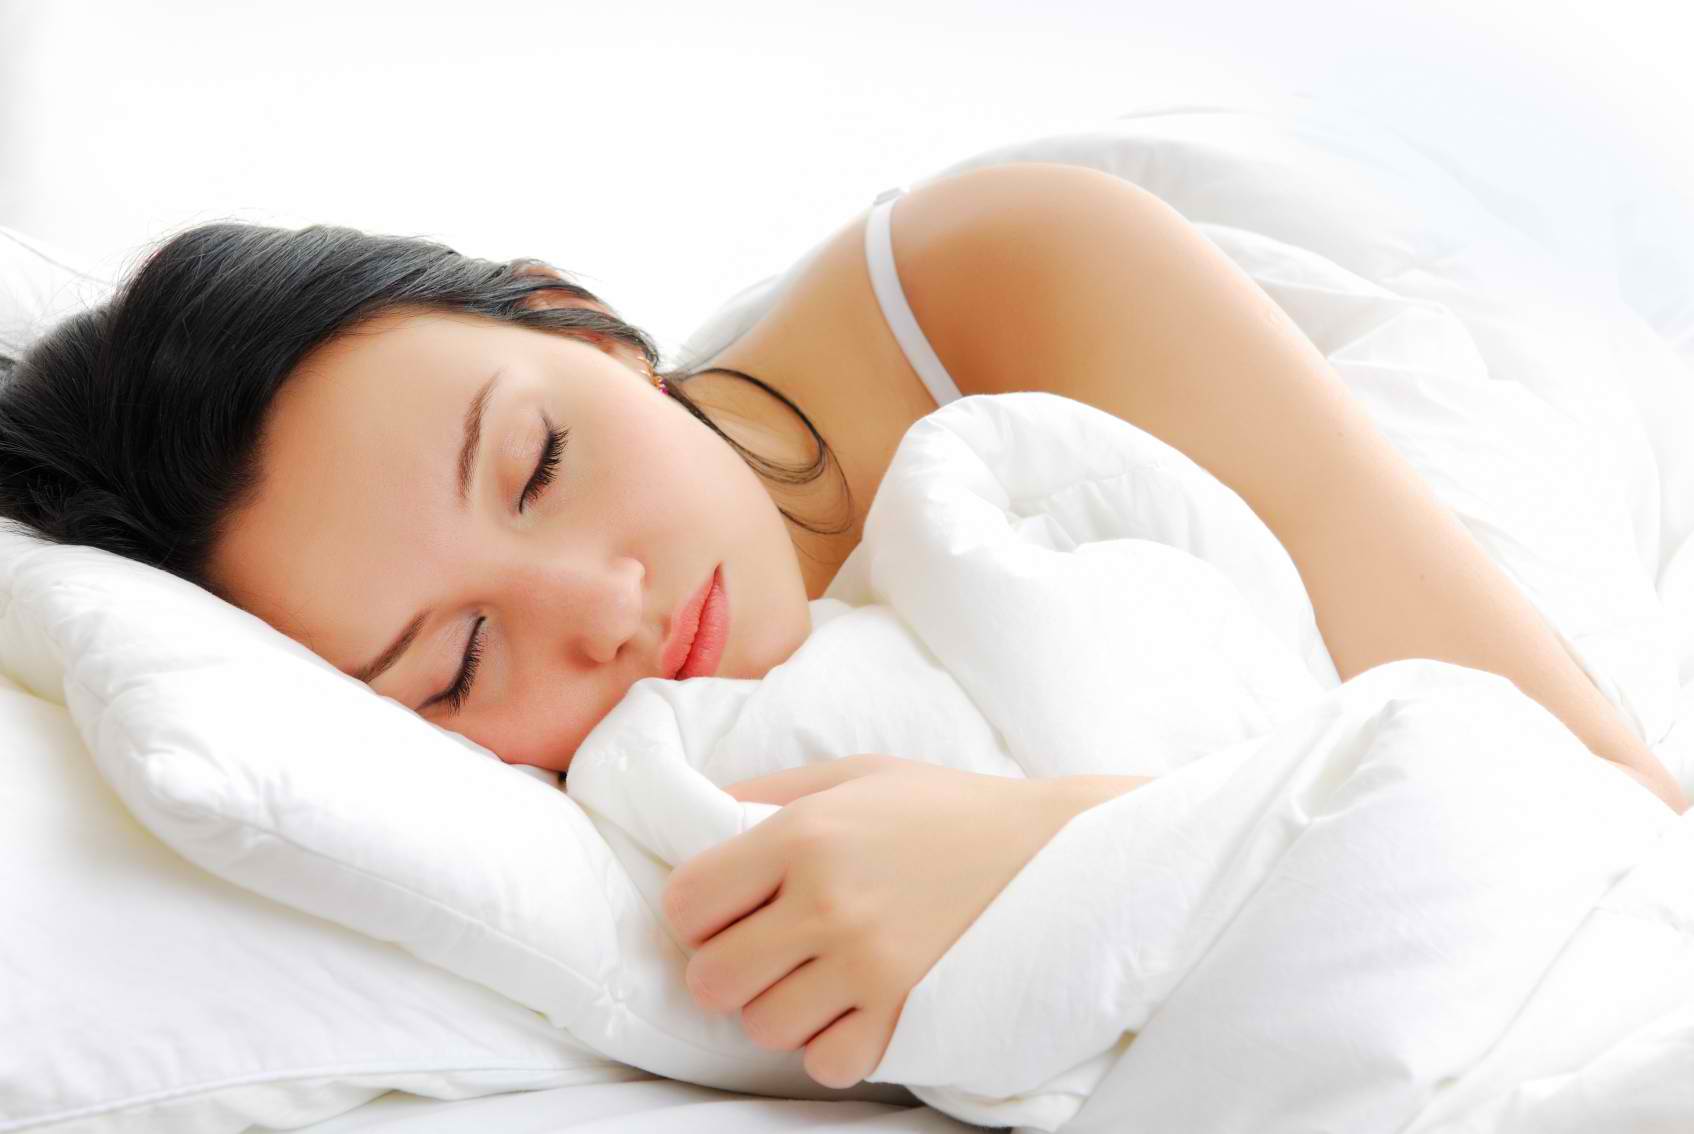 CDC Offers Insight on How to Get Enough Sleep